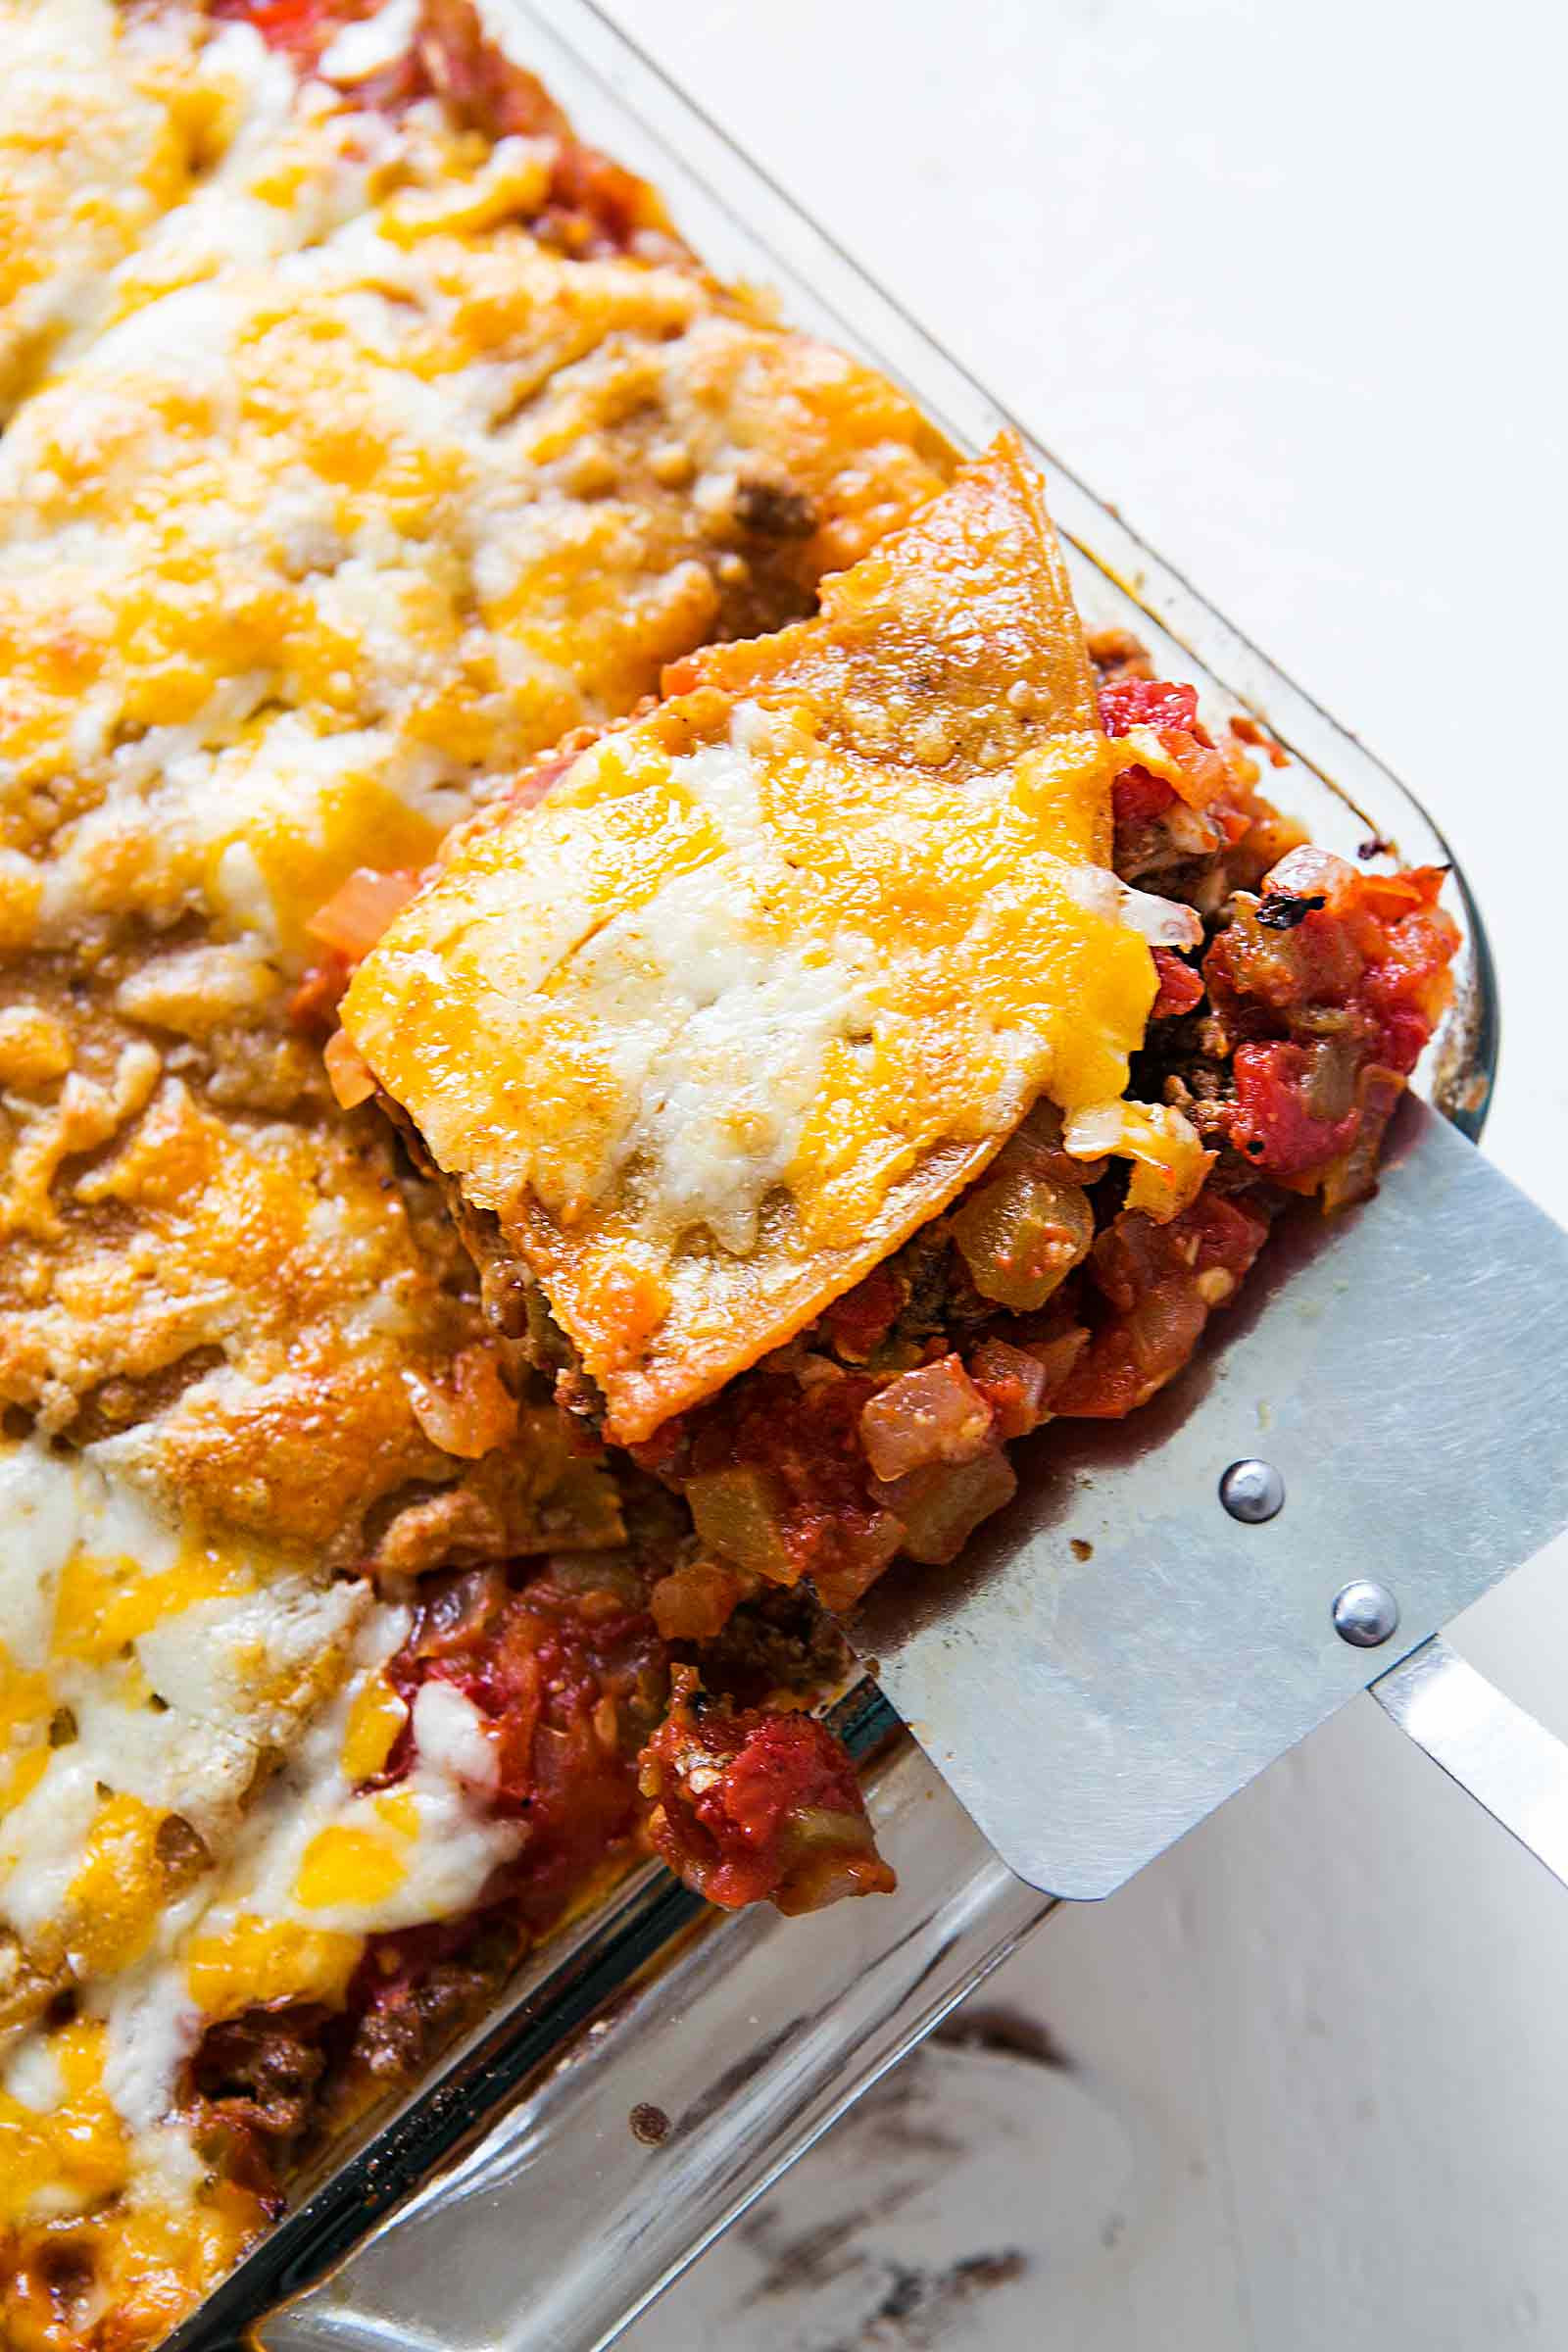 The 25 Best Ideas for Mexican Lasagna with Flour tortillas - Home ...